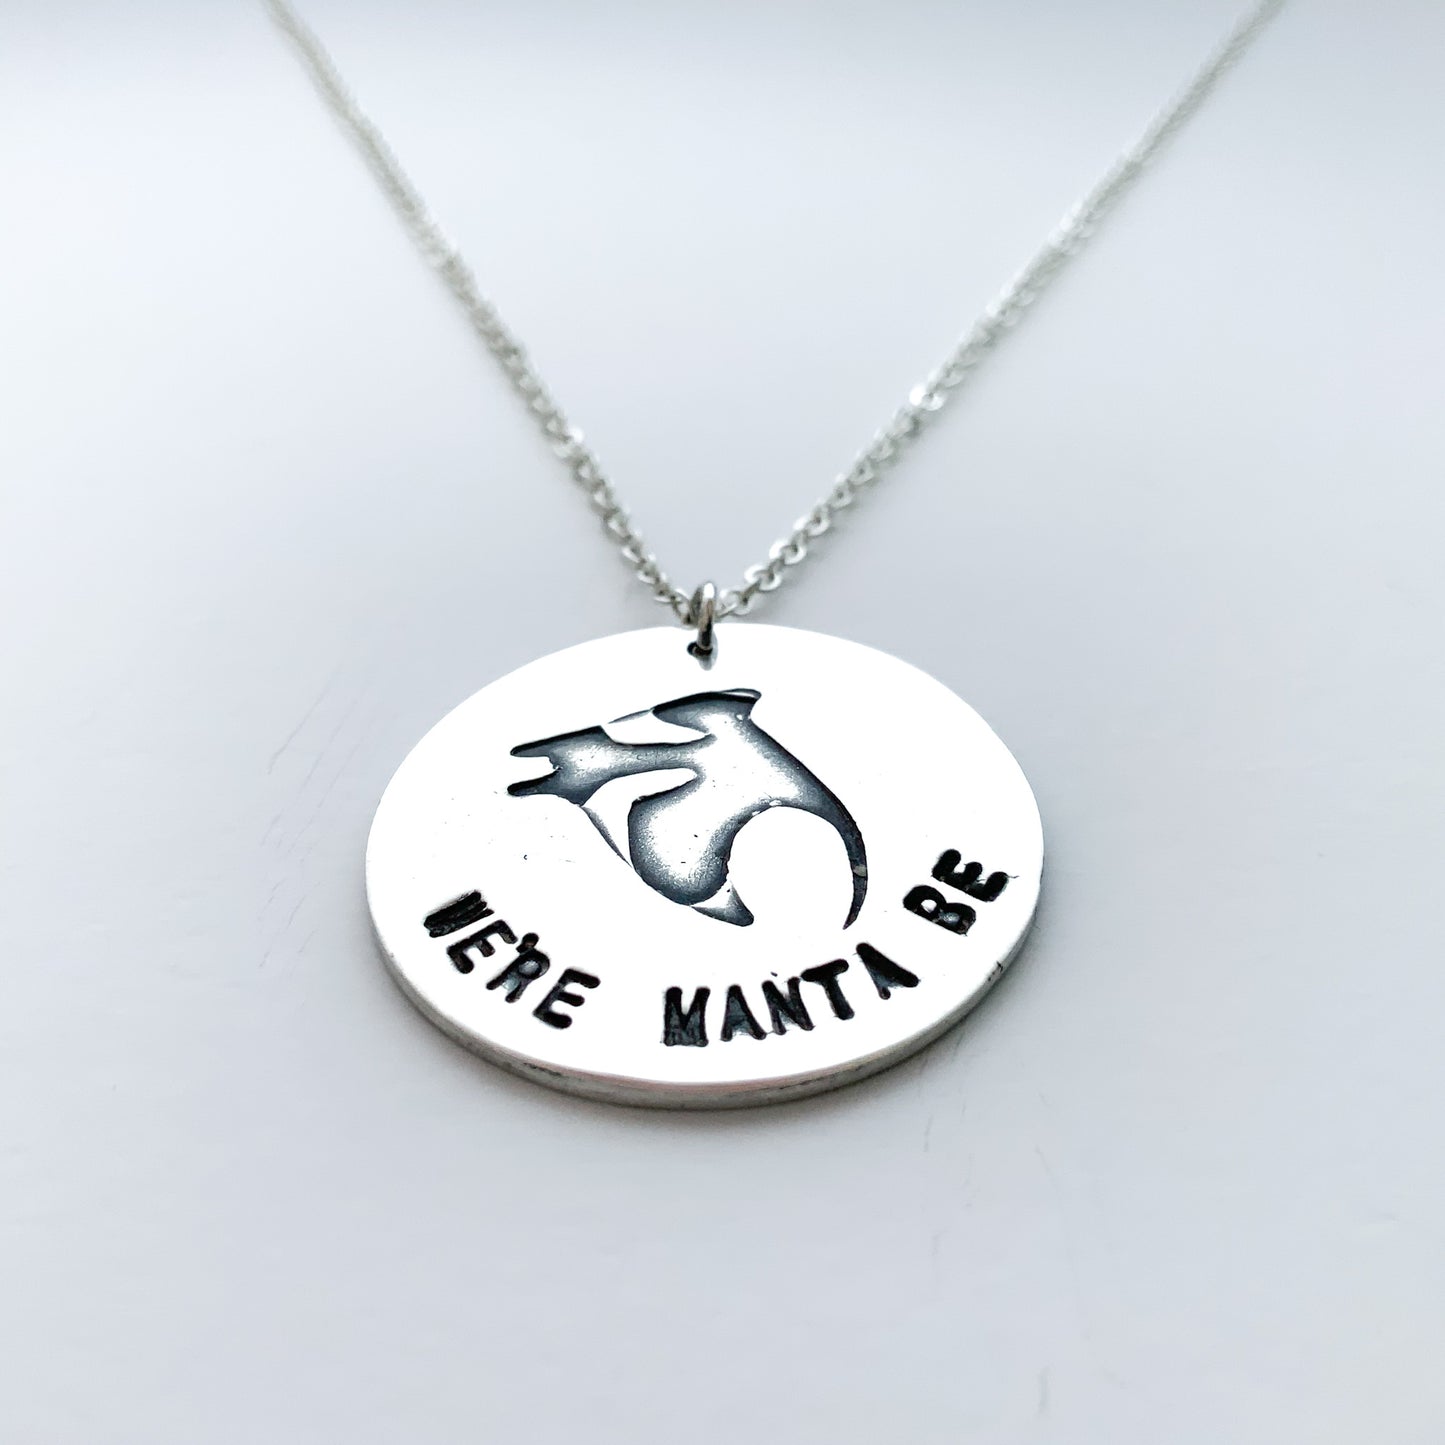 We're Manta Be | Cute silver Manta Ray pendant with romantic message